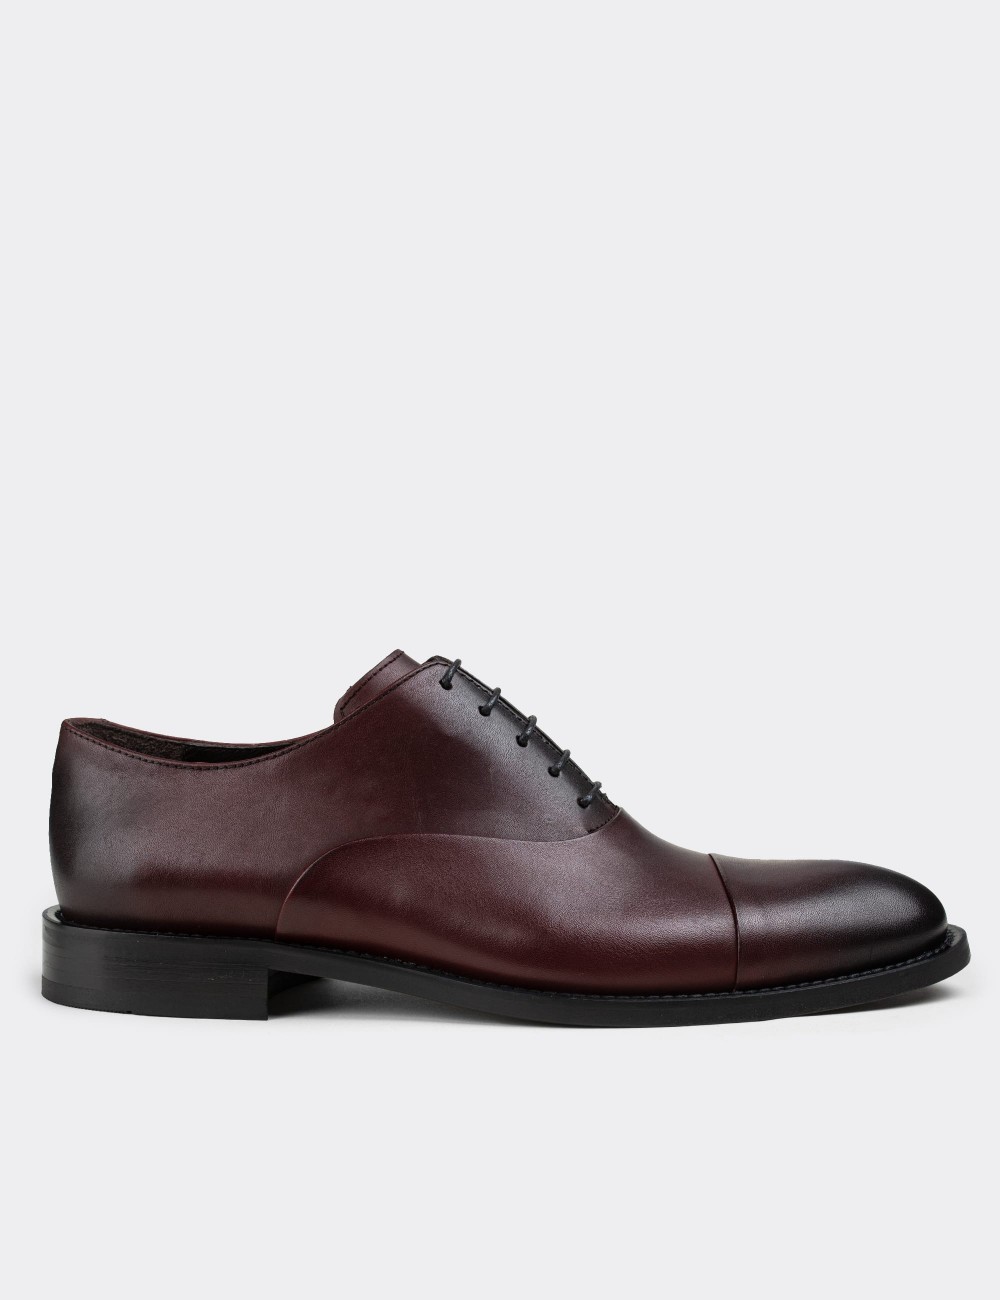 Burgundy  Leather Classic Shoes - 01026MBRDM02